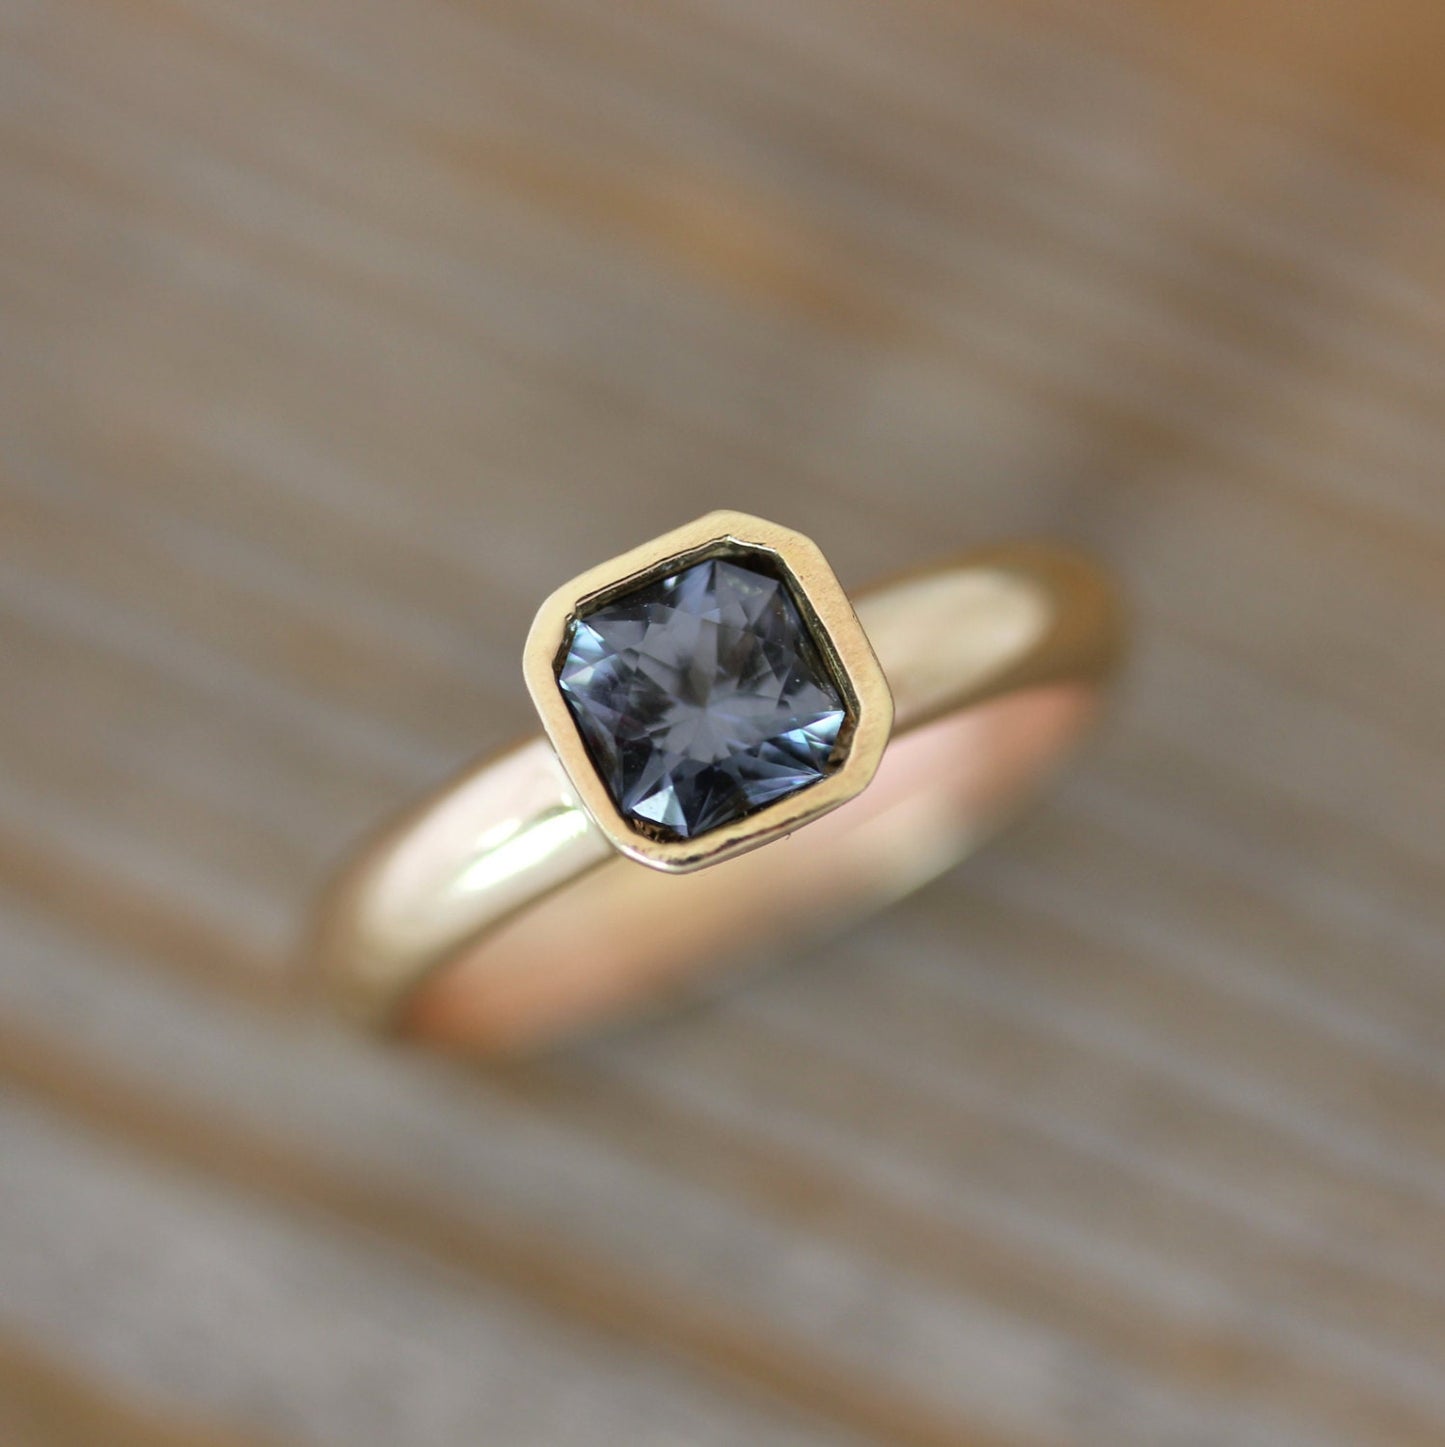 Handmade jewelry: A Asscher Cut Pink Spinel Ring in 14k Yellow Gold with a blue sapphire in the center.